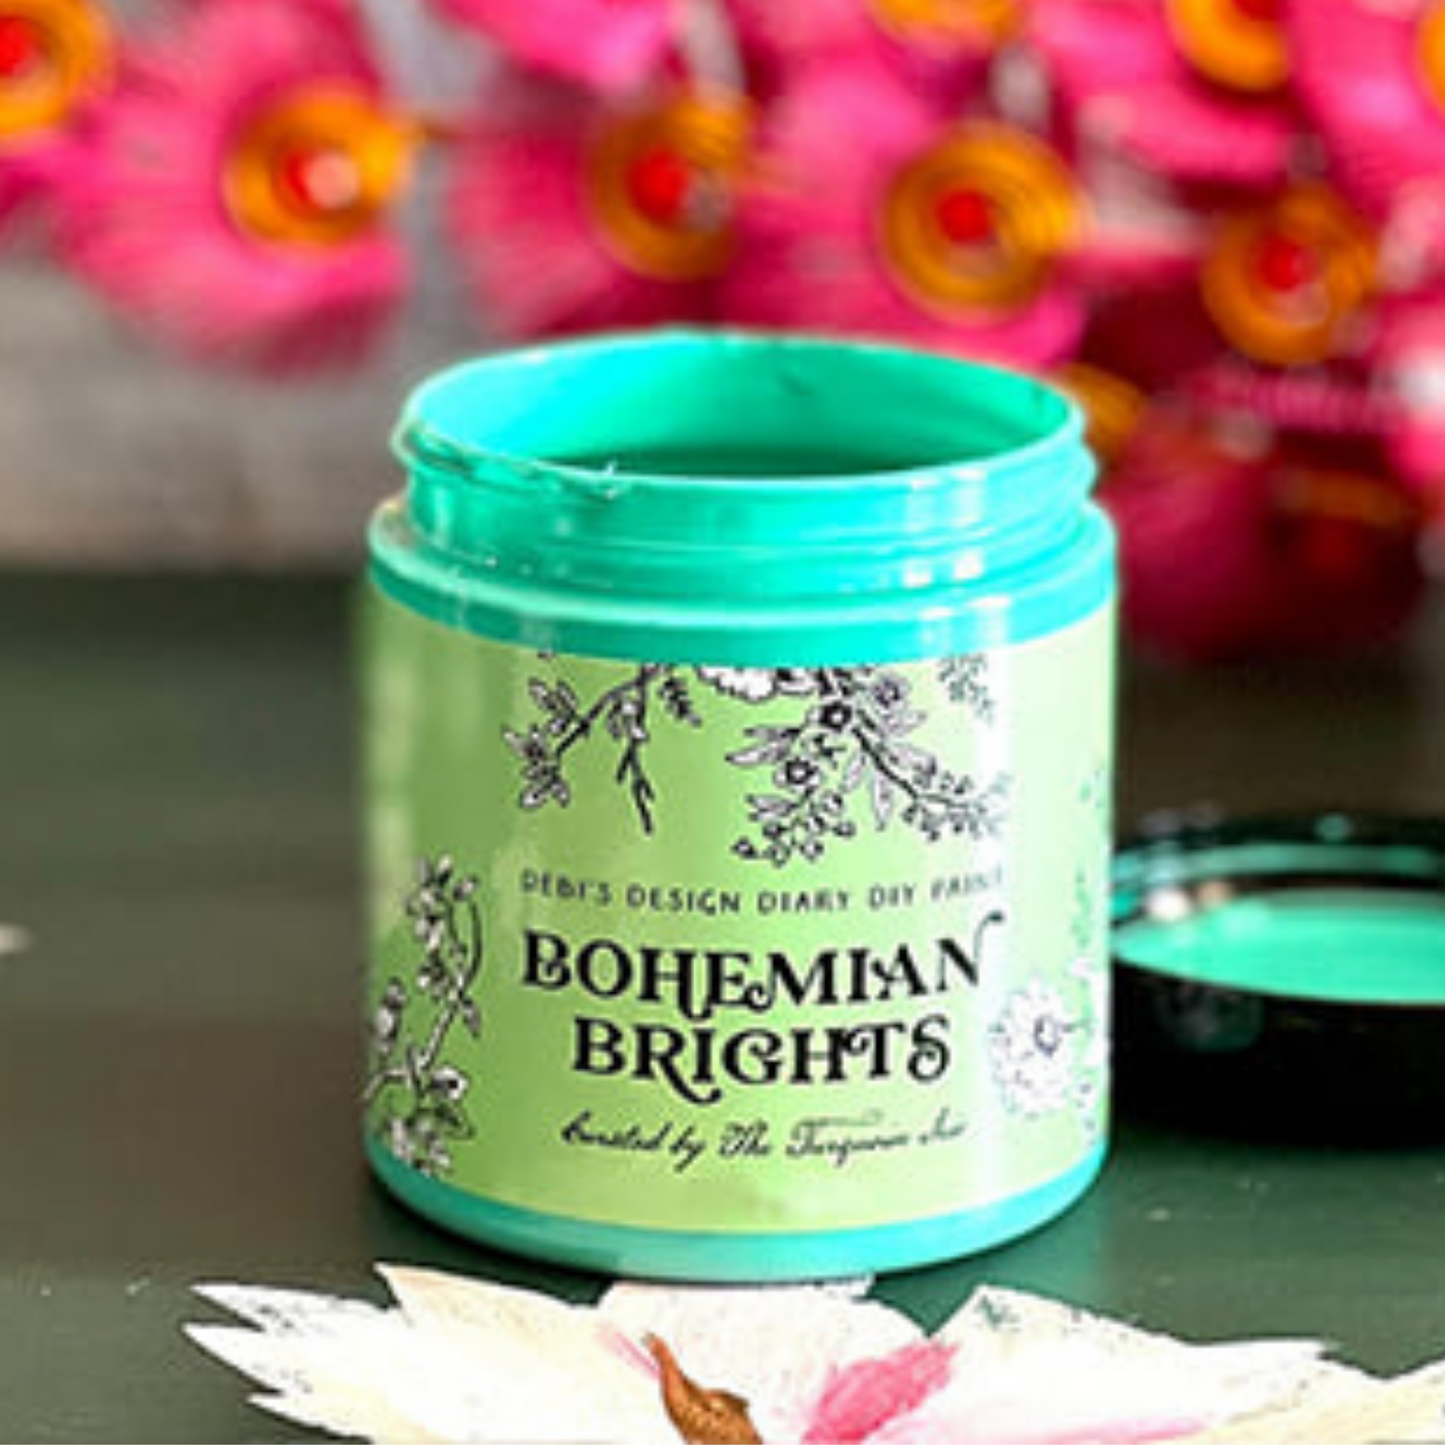 Color "Wandering Heart" from the Bohemian Brights Collection by by Debi's Design Diary DIY Paint. 4 oz. jar available at Milton's Daughter. Curated by Dionne Woods of the Turquoise Iris.